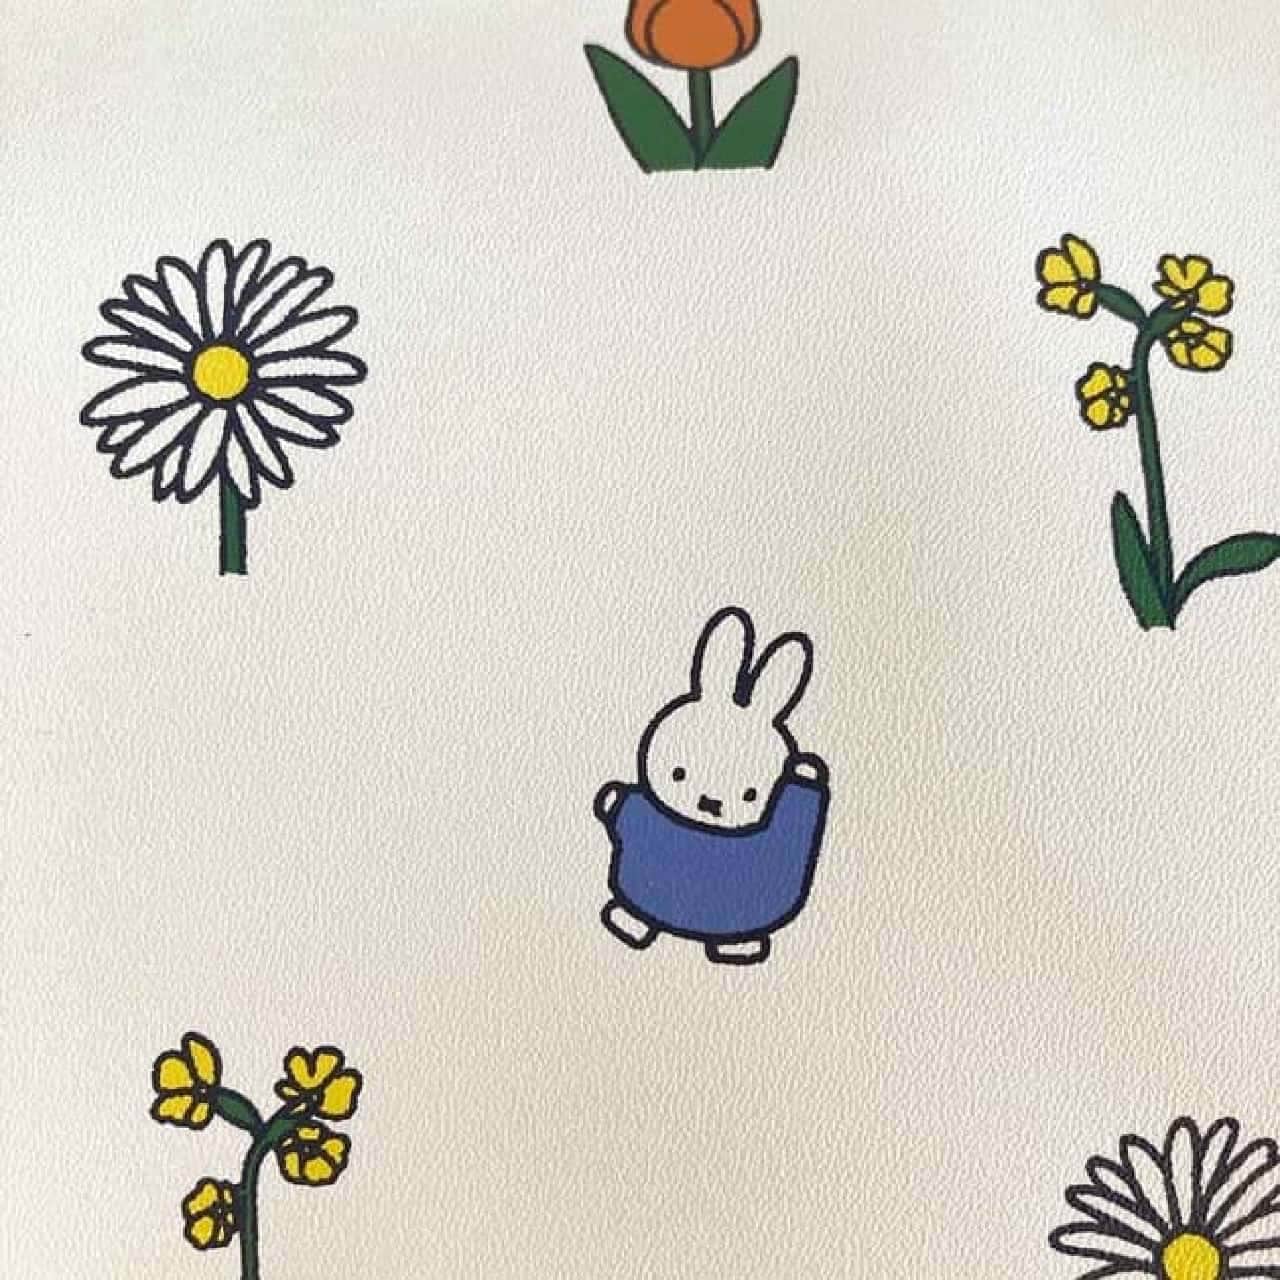 Miffy Pattern Tissue Covers and Storage Boxes -- Simple Cuteness! Springtime with flowers & animals